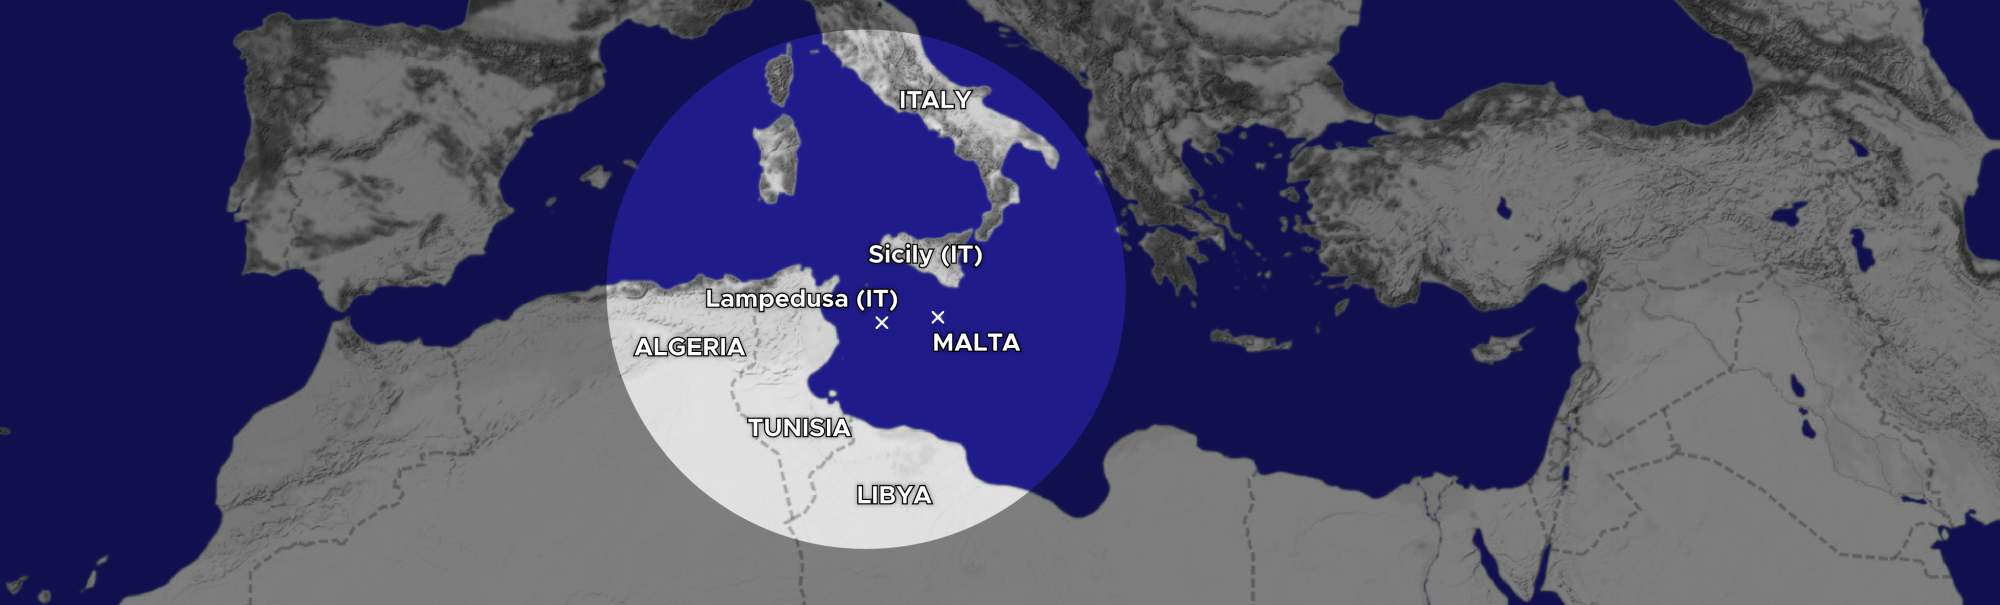 map of the mediterranean sea. The countries and waters of the region called 'central mediterranean' are highlighted and labelled; Those countries are: Italy (including its islands Lampedusa and Sicily), Malta, Libya, Tunisia and Algeria